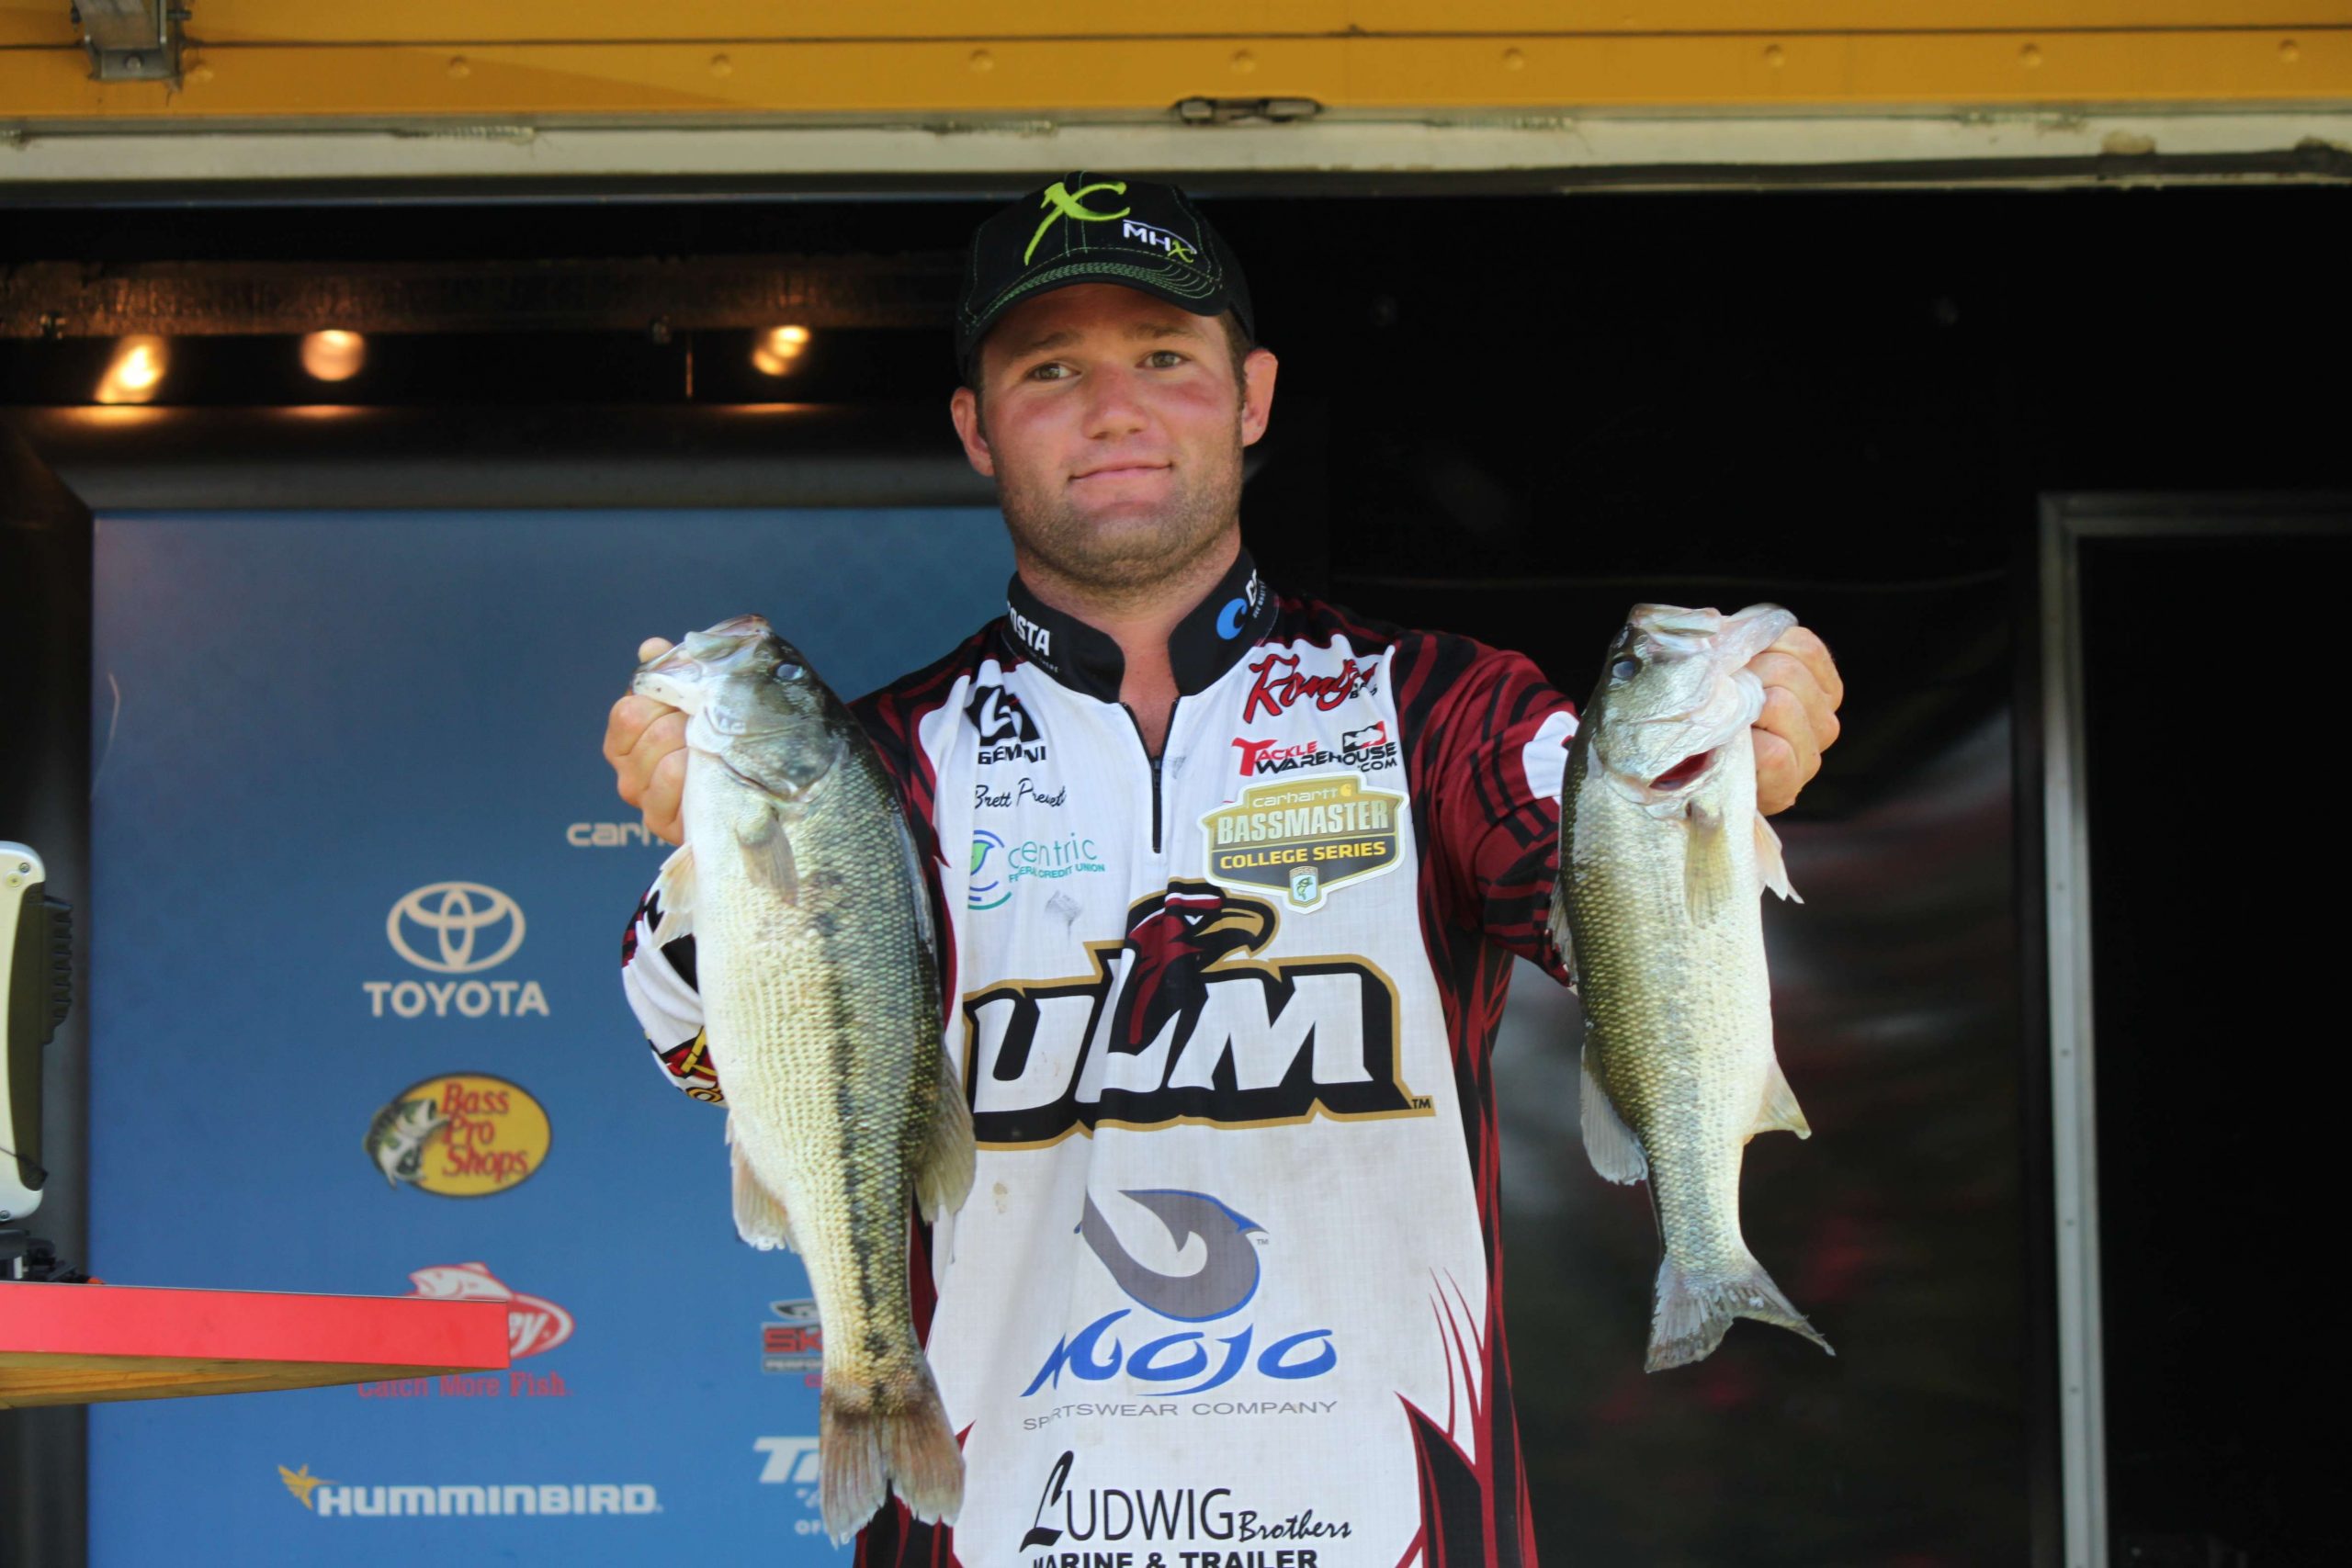 Brett Preuett (2014 College Classic Bracket Champion and Elite Series Pro)

When I won the College Classic Bracket it meant everything to me at that point in my life because I had spent countless hours fishing, practicing, always doing whatever I could to get better. There were struggles, triumphs, missed opportunities and everything else you could possibly have happen. Lost fish, boat problems, and a million other things . There were nights and days spent day dreaming what it would be like to fish professionally (when I probably should have been studying or working). The biggest opportunity was right in front of me. I was fishing the very last day on Lake Chatuge with my dreams right in front of my eyes and everything worked out perfect as it was just meant to be like there was nothing I could of did wrong and God wanted me to win. The moment I jumped in the water after winning I just kind of chilled down there under the water for a little longer than you normally would and it came to me that the moment every single thing was worth it and it was one of the greatest moments of my life.